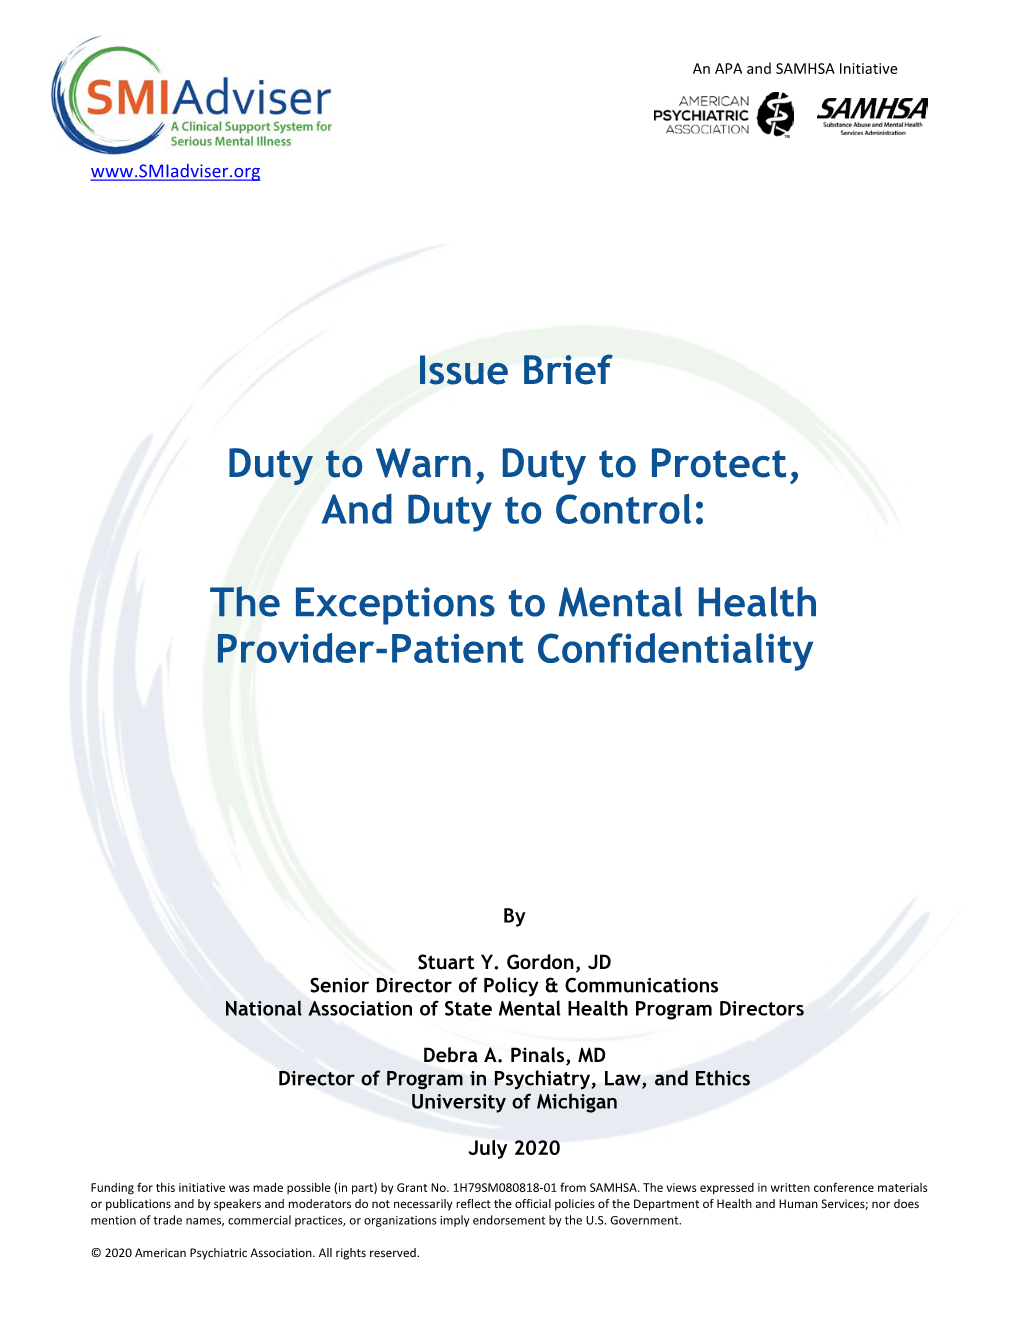 Issue Brief Duty to Warn, Duty to Protect, and Duty to Control: The